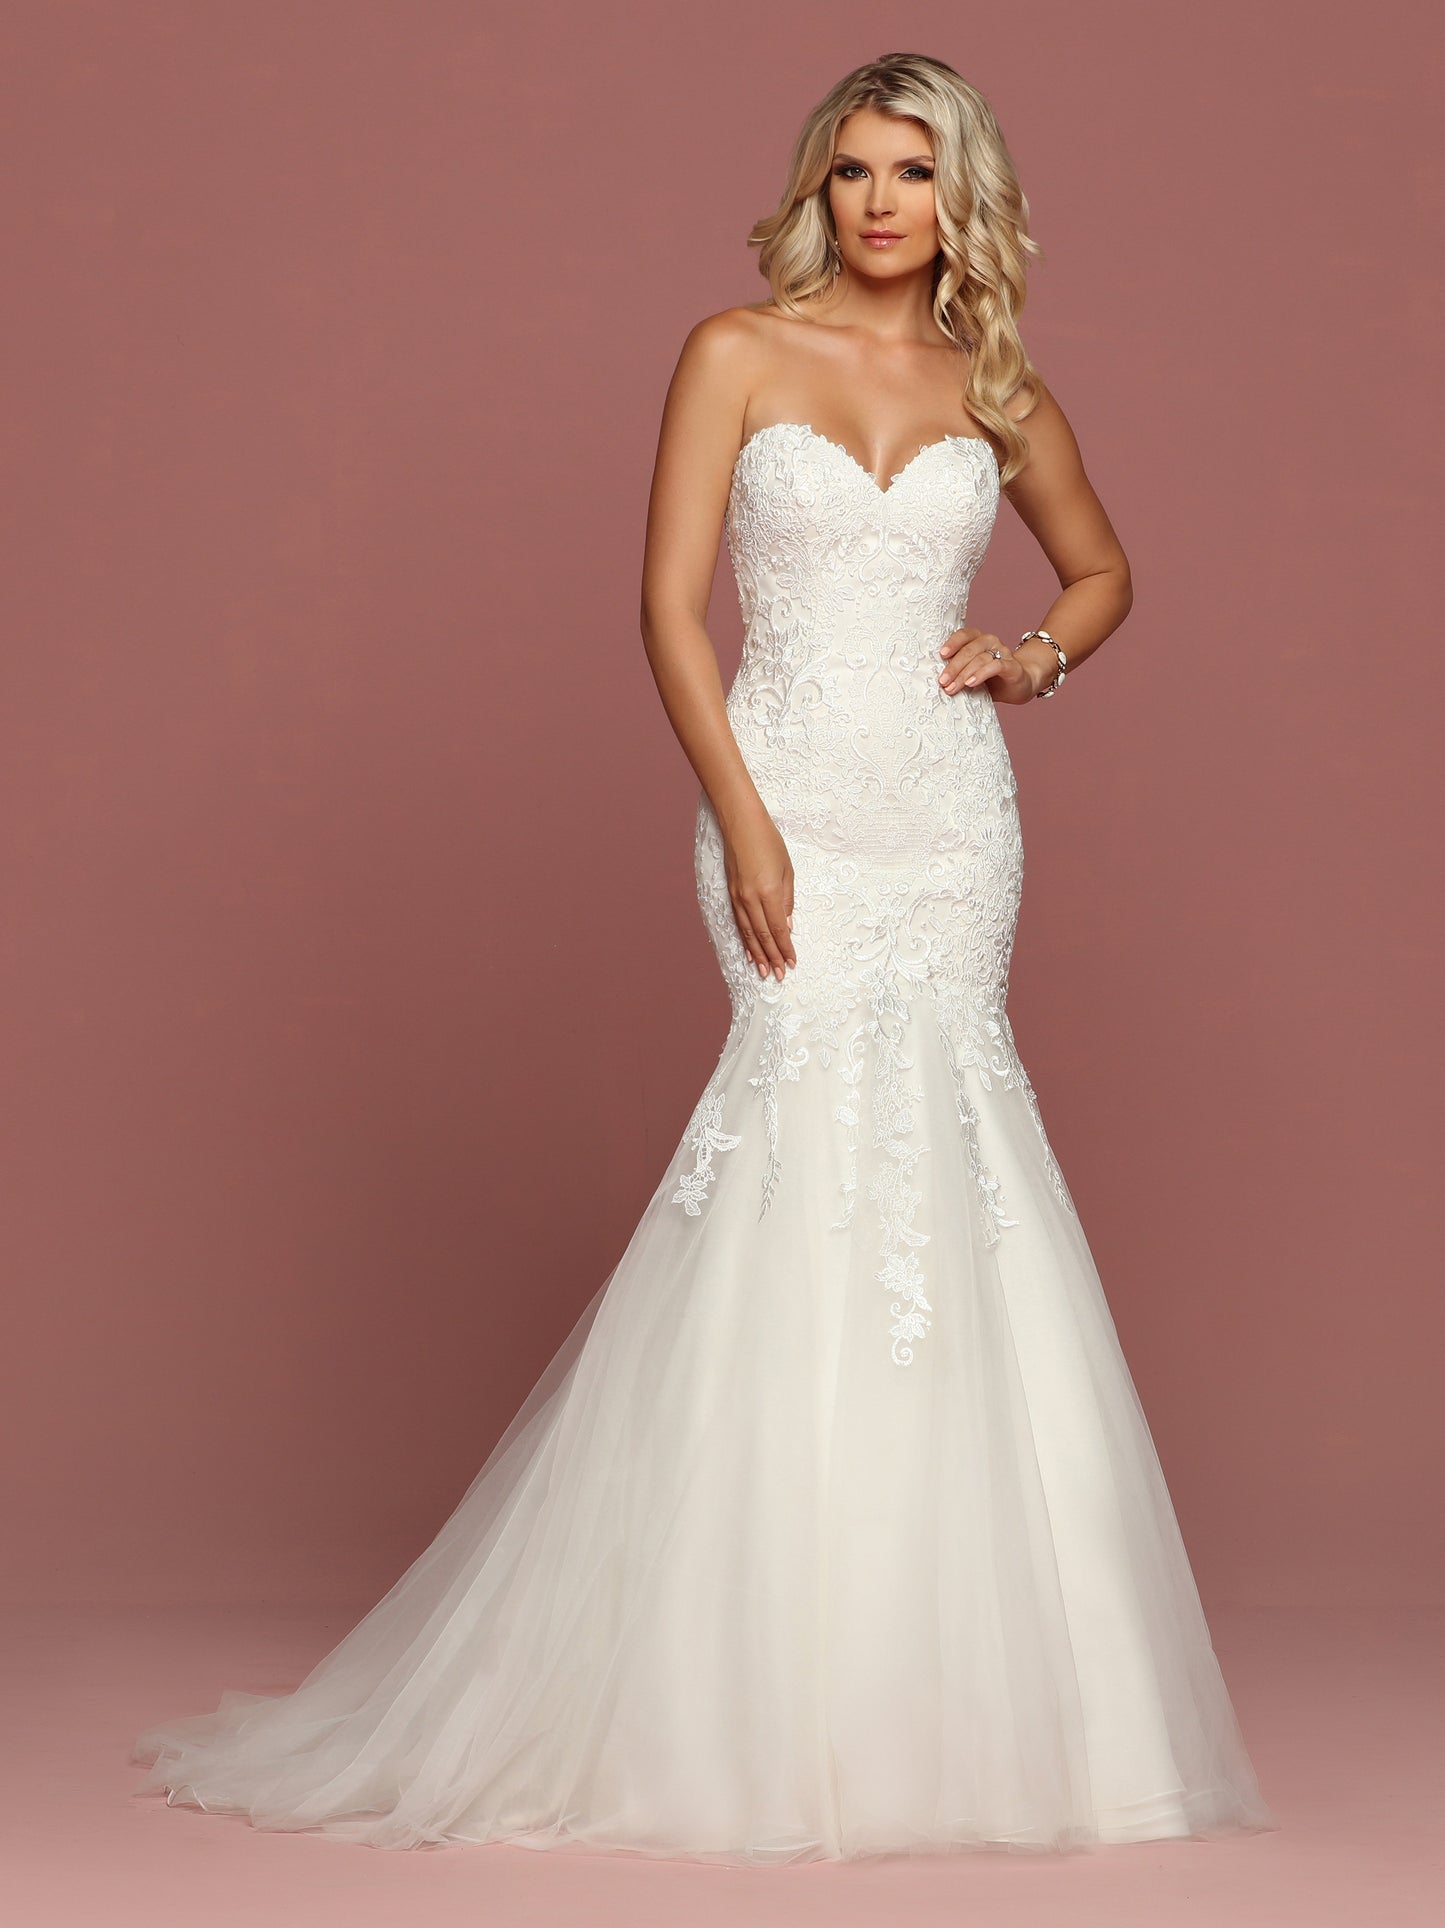 Davinci Bridal 50502  is a long Fit & Flare Mermaid Wedding Dress. Featuring a strapless sweetheart neckline with a bodice covered in delicate lace cascading down into the trumpet tulle skirt with a train in the back.  Available for 1-2 Week Delivery!!!  Available Sizes: 2,4,6,8,10,12,14,16,18,20  Available Colors: Ivory